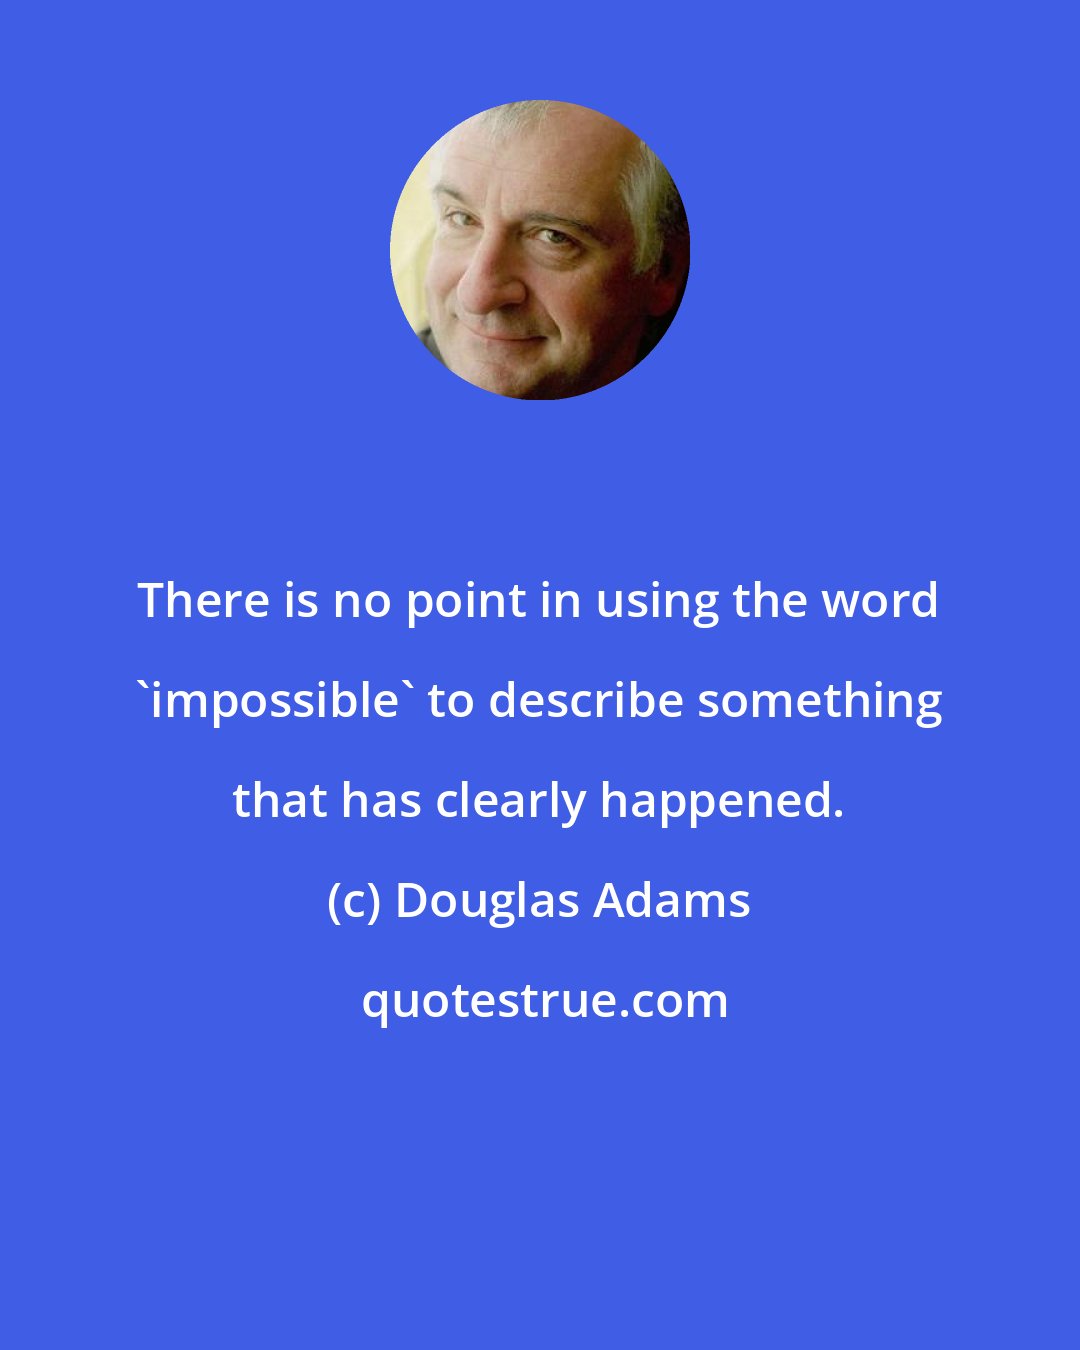 Douglas Adams: There is no point in using the word 'impossible' to describe something that has clearly happened.